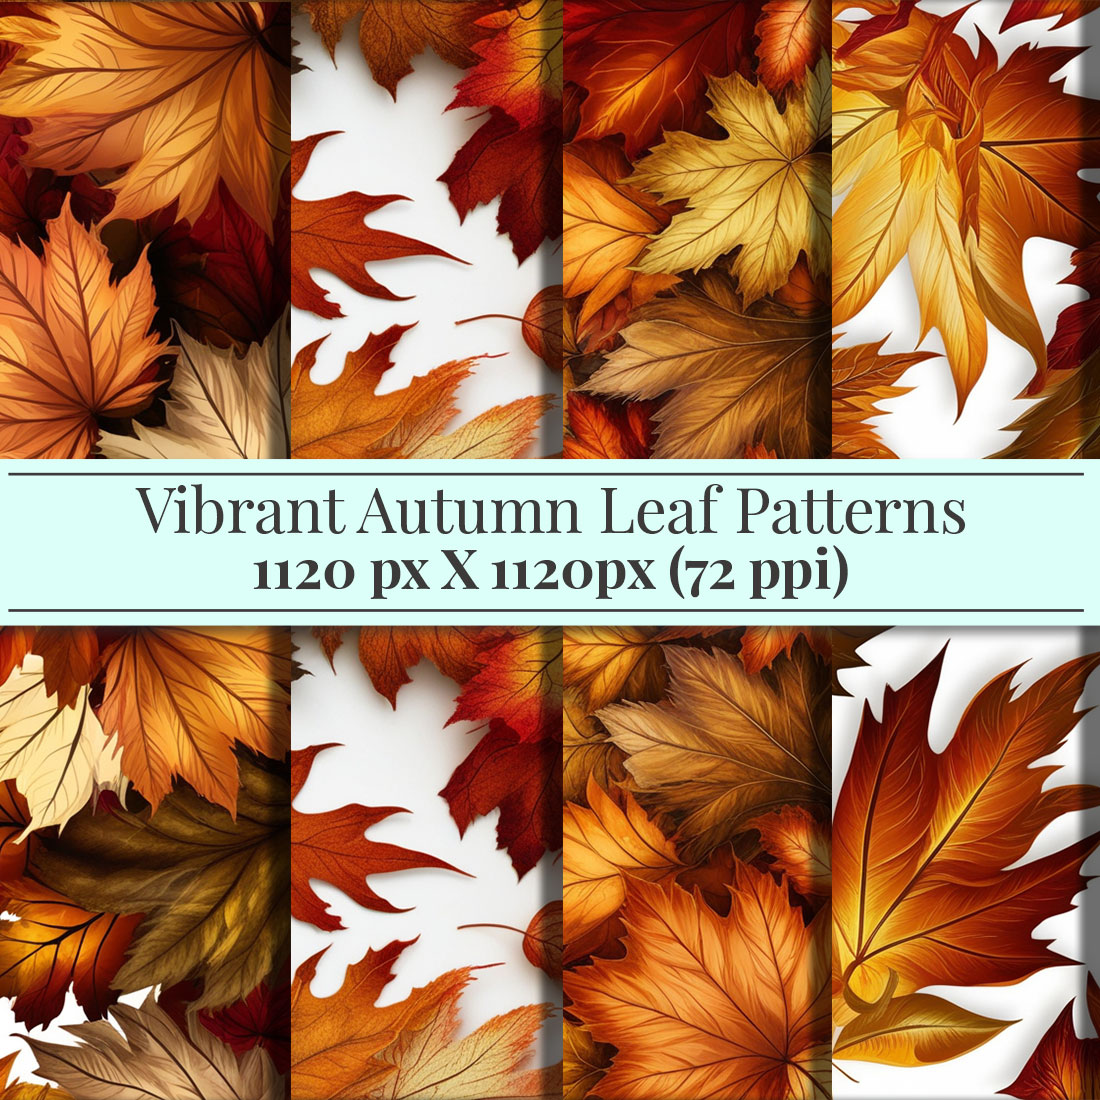 Intricate Autumn Leaf Patterns Digital Paper Bundle - Seamless Fall Leaves in Rich Earthy Tones cover image.